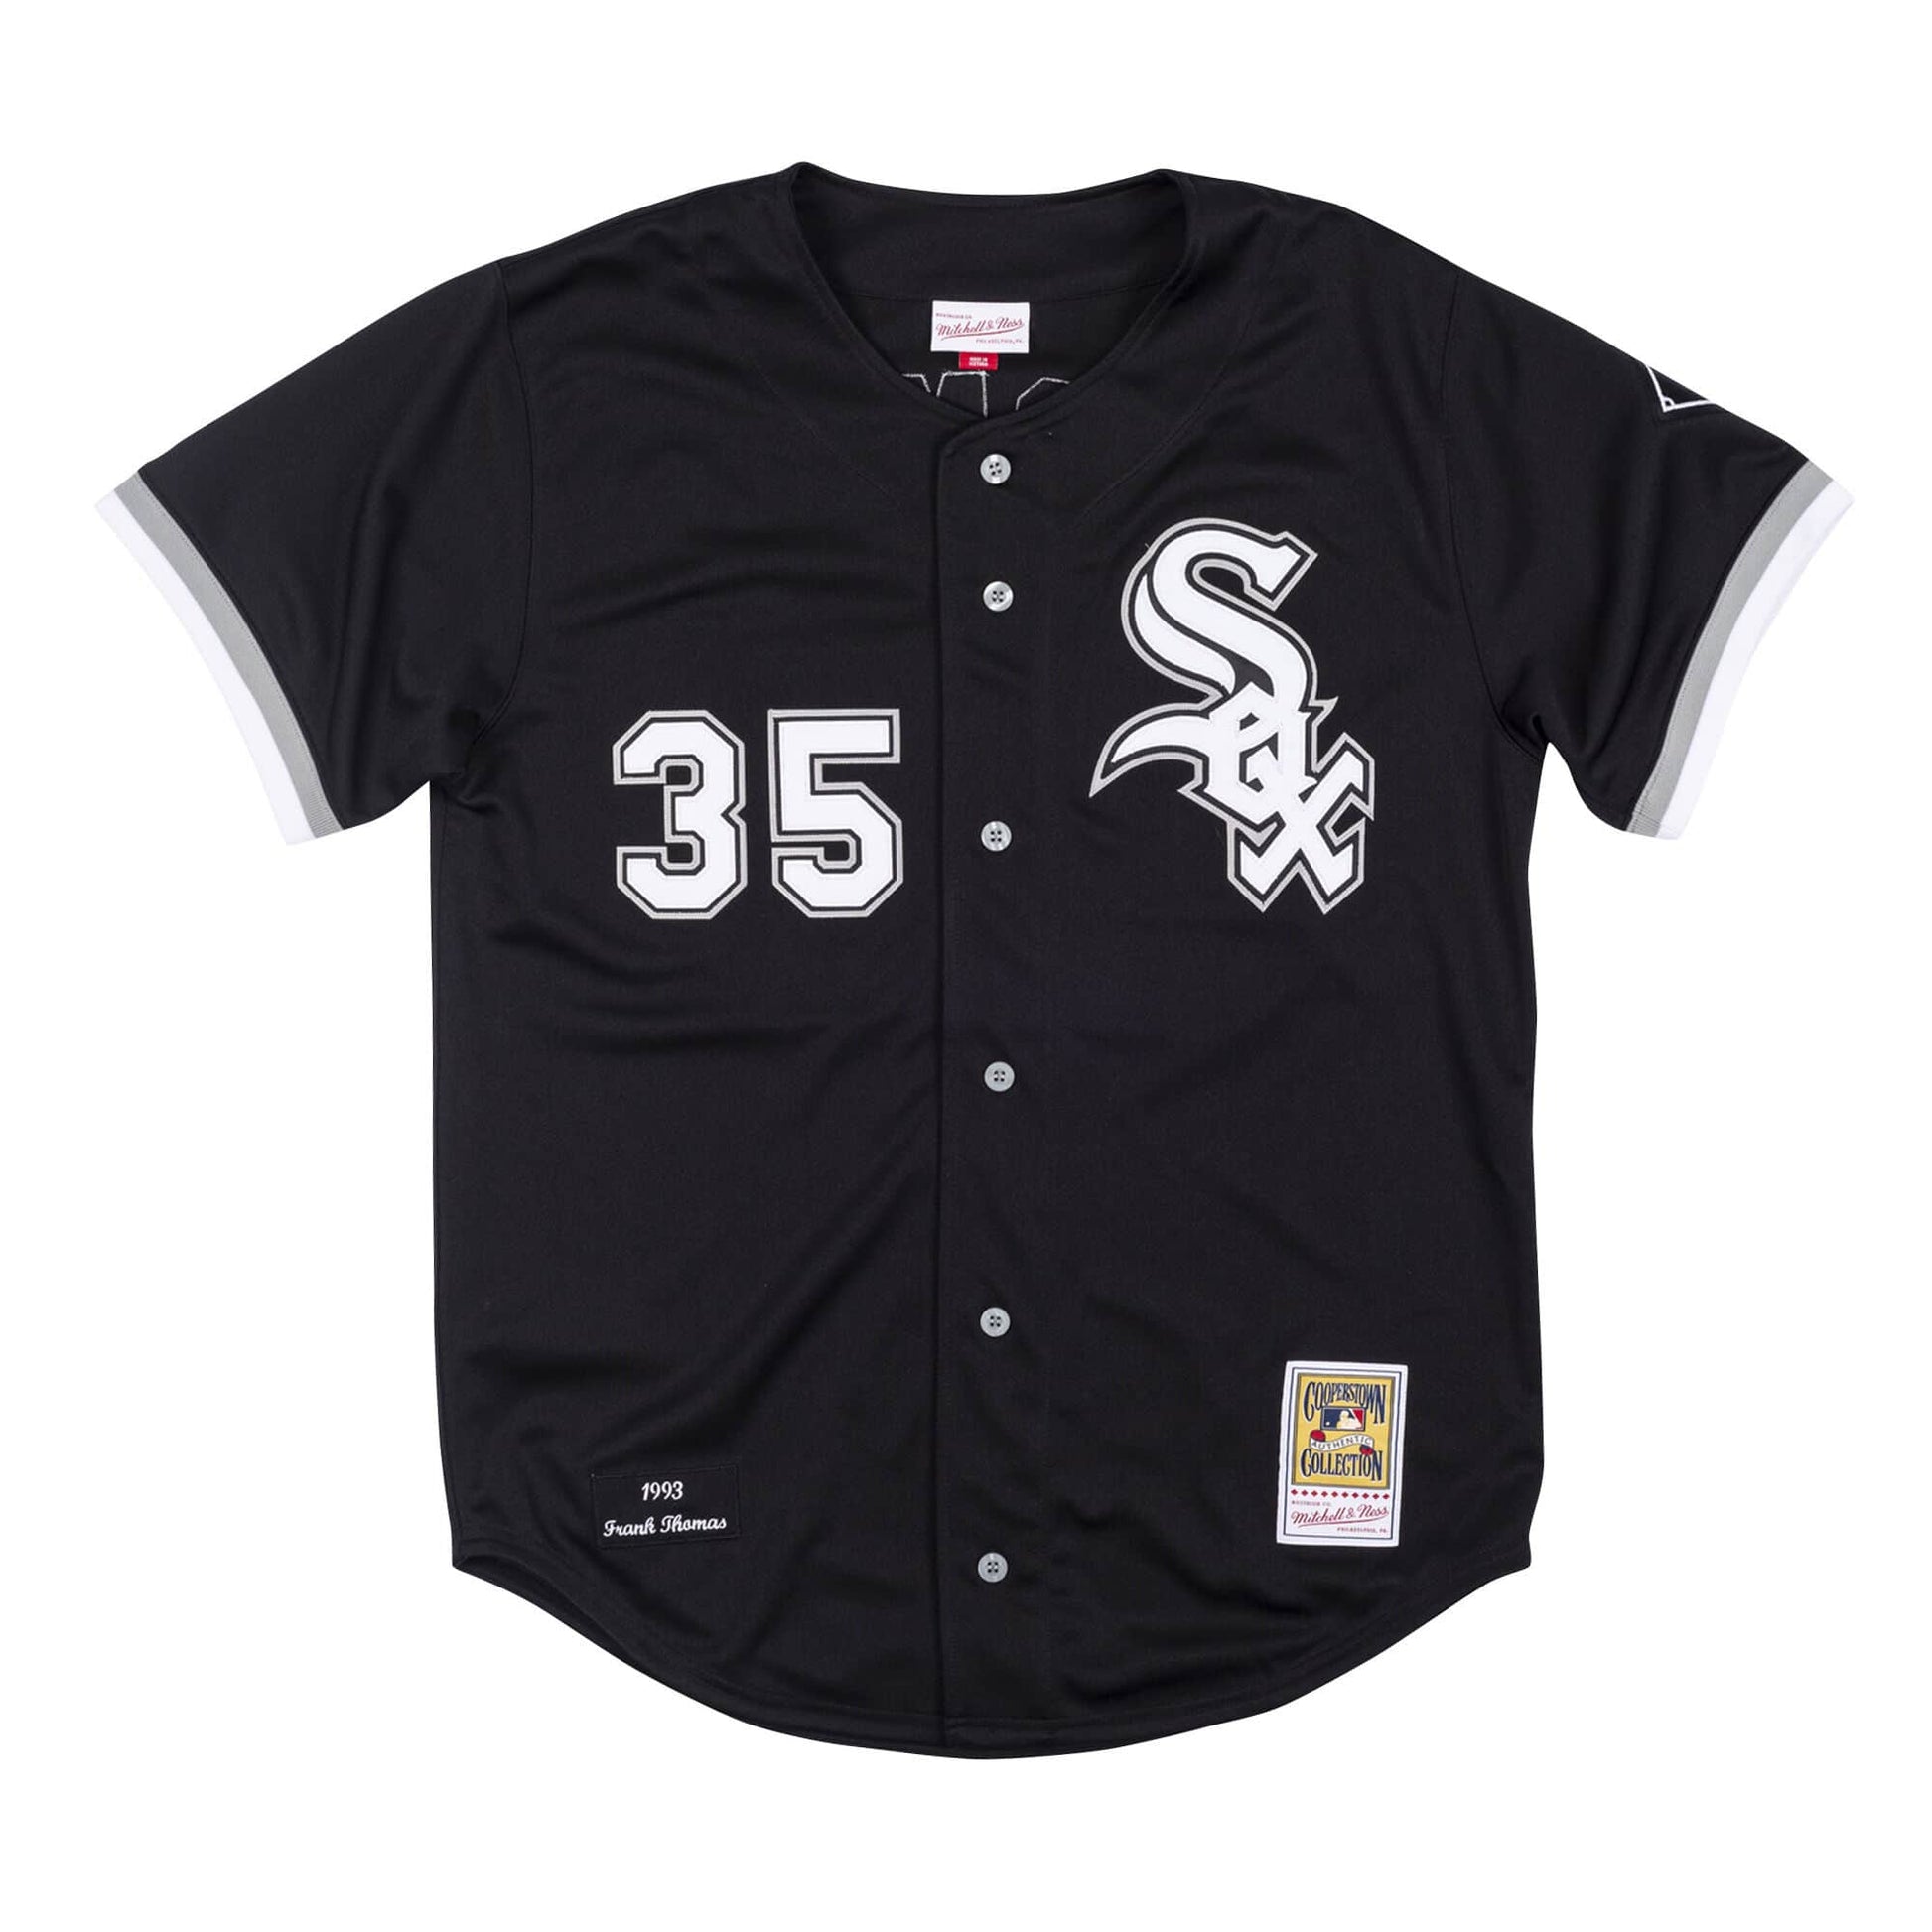 frank thomas jersey number